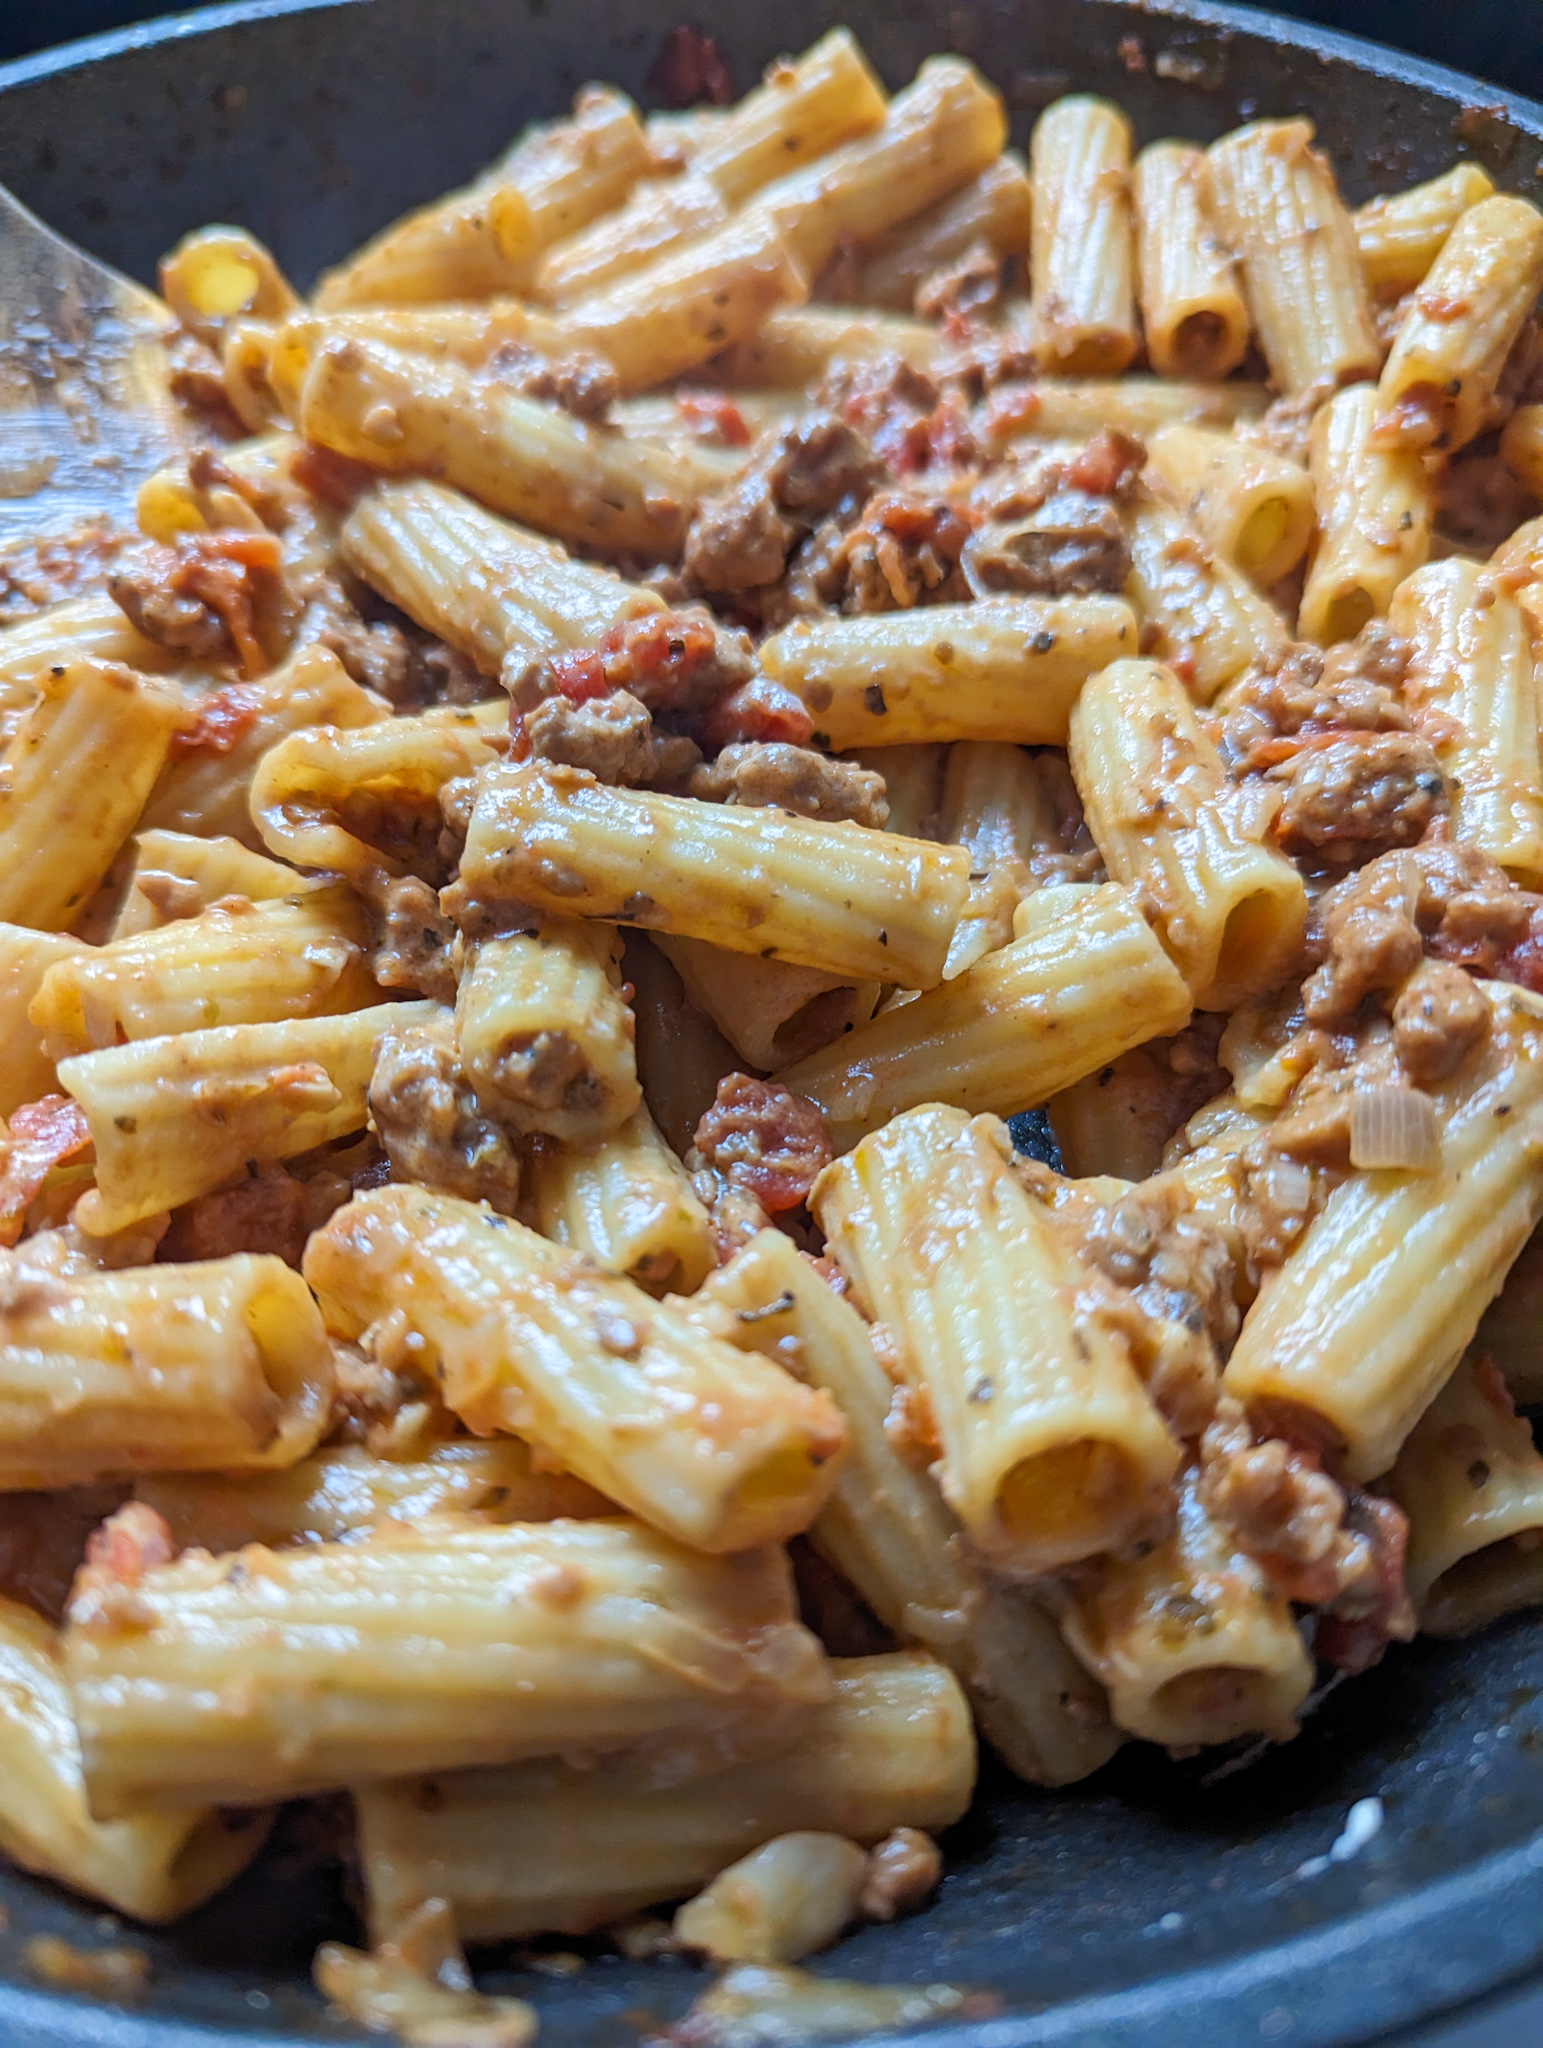 Tomato and Sausage Pasta with Goat Cheese - Unapologetic Eats